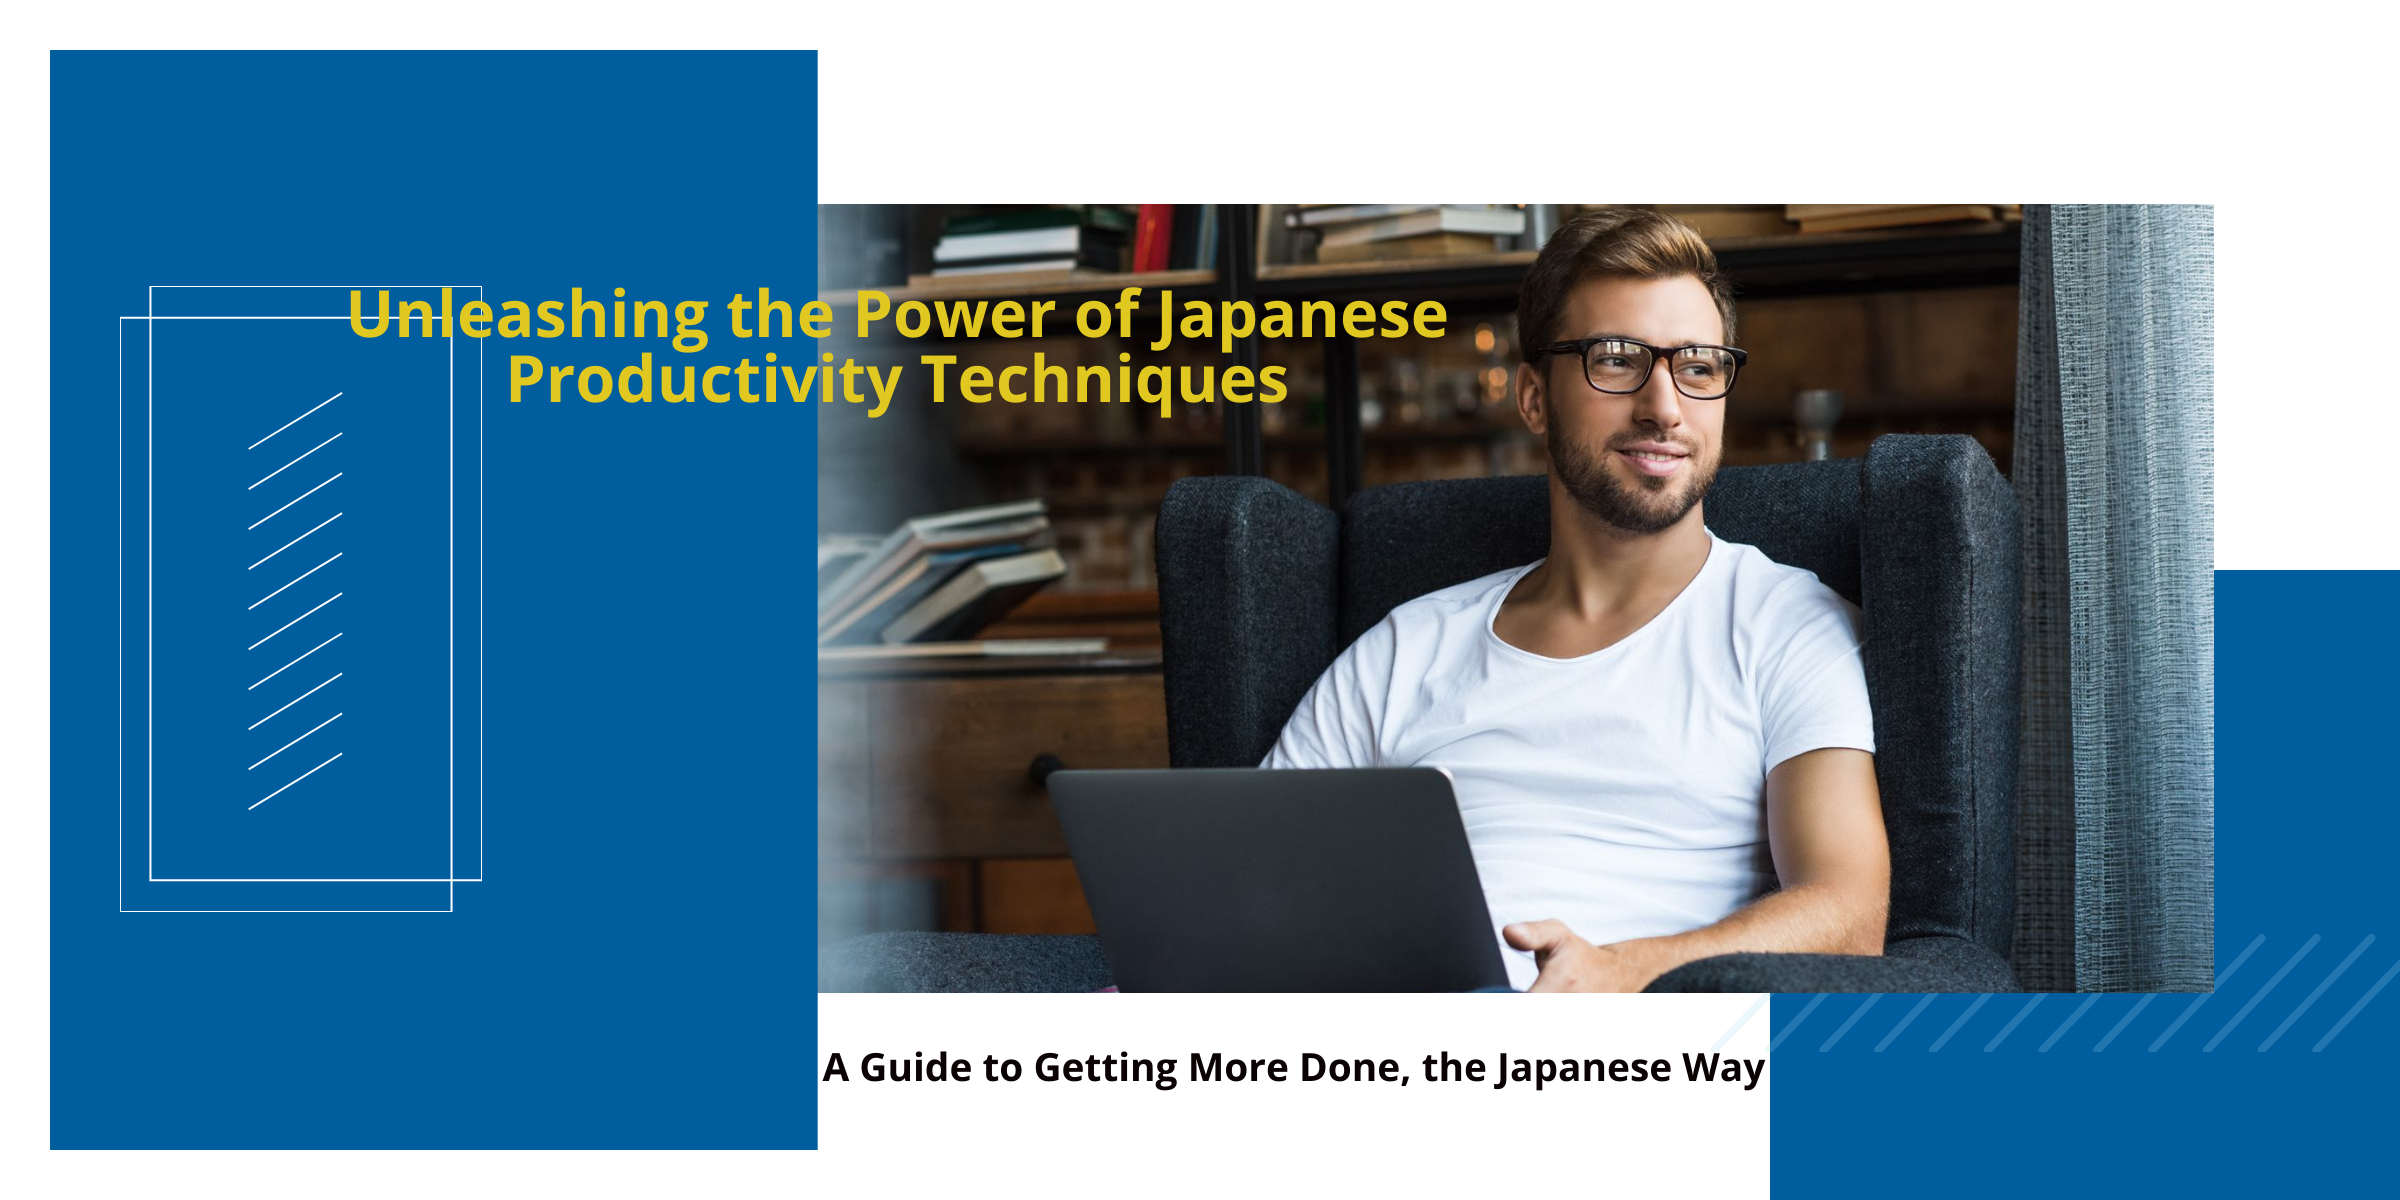 A Guide to Unleashing Japanese Productivity Techniques.